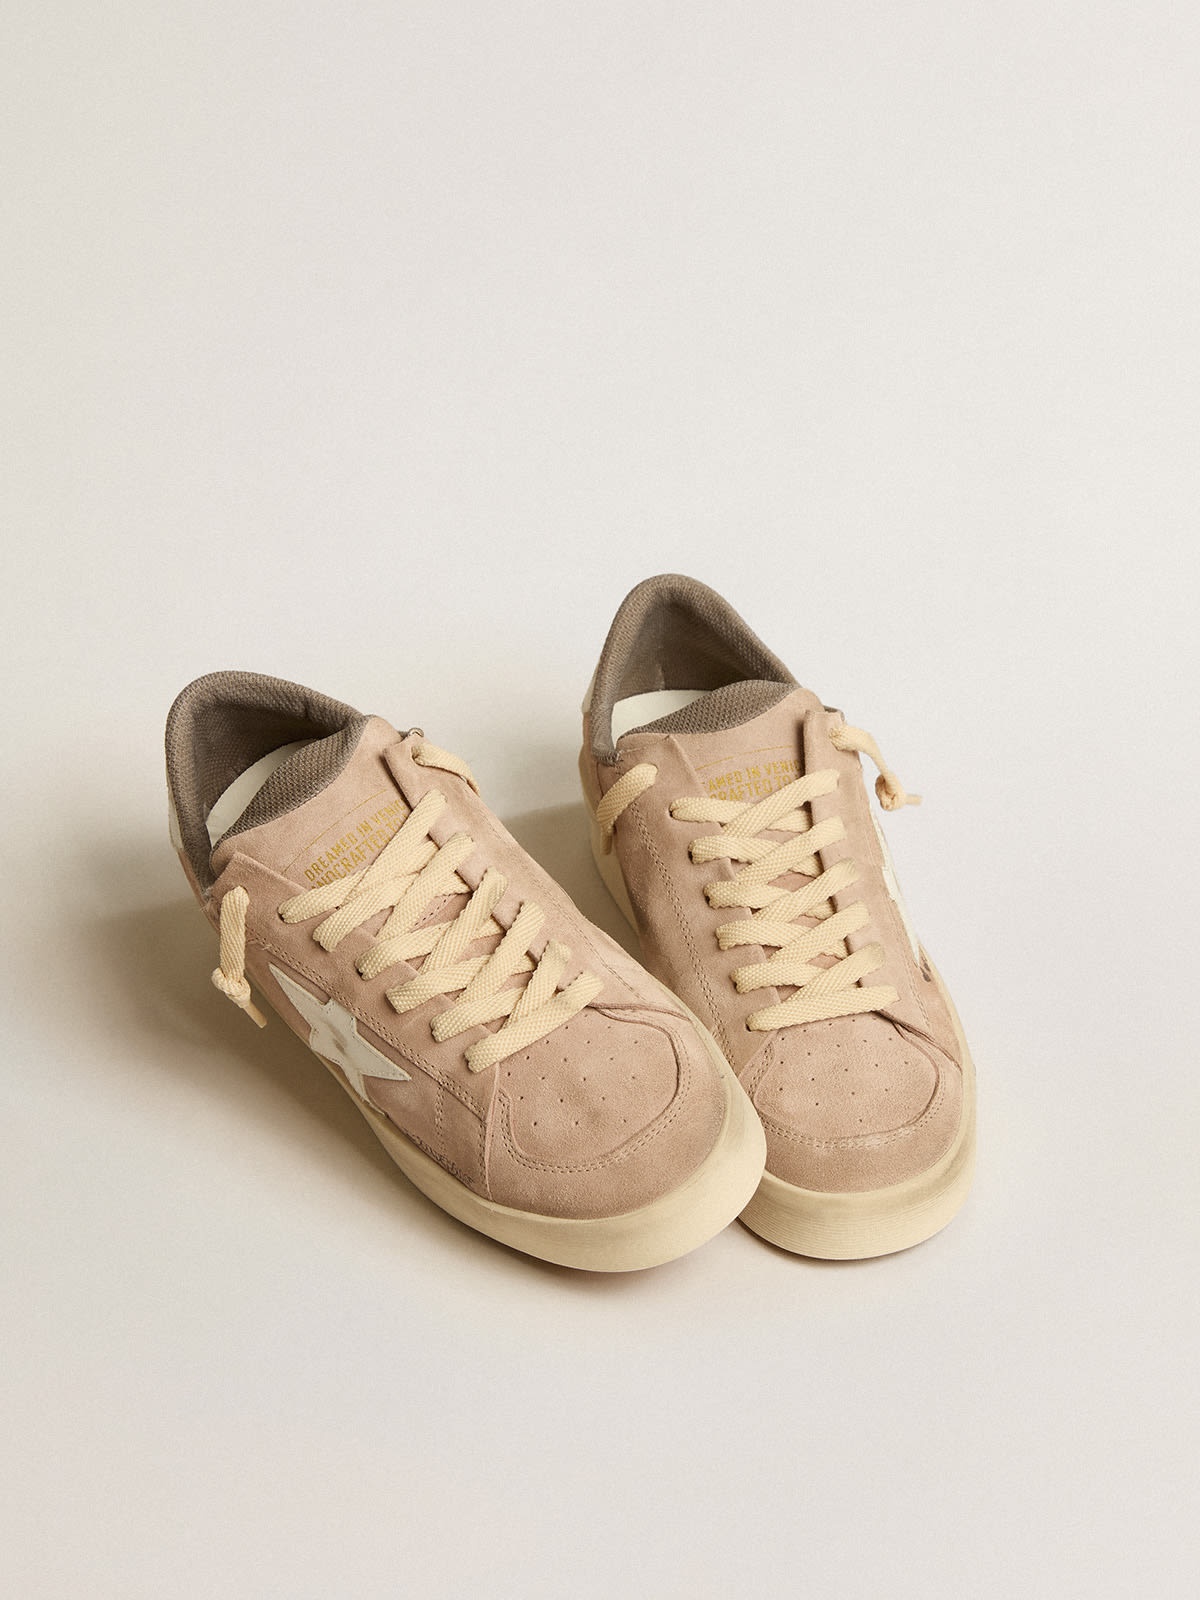 Stardan in old rose suede with white leather star and heel tab - 2